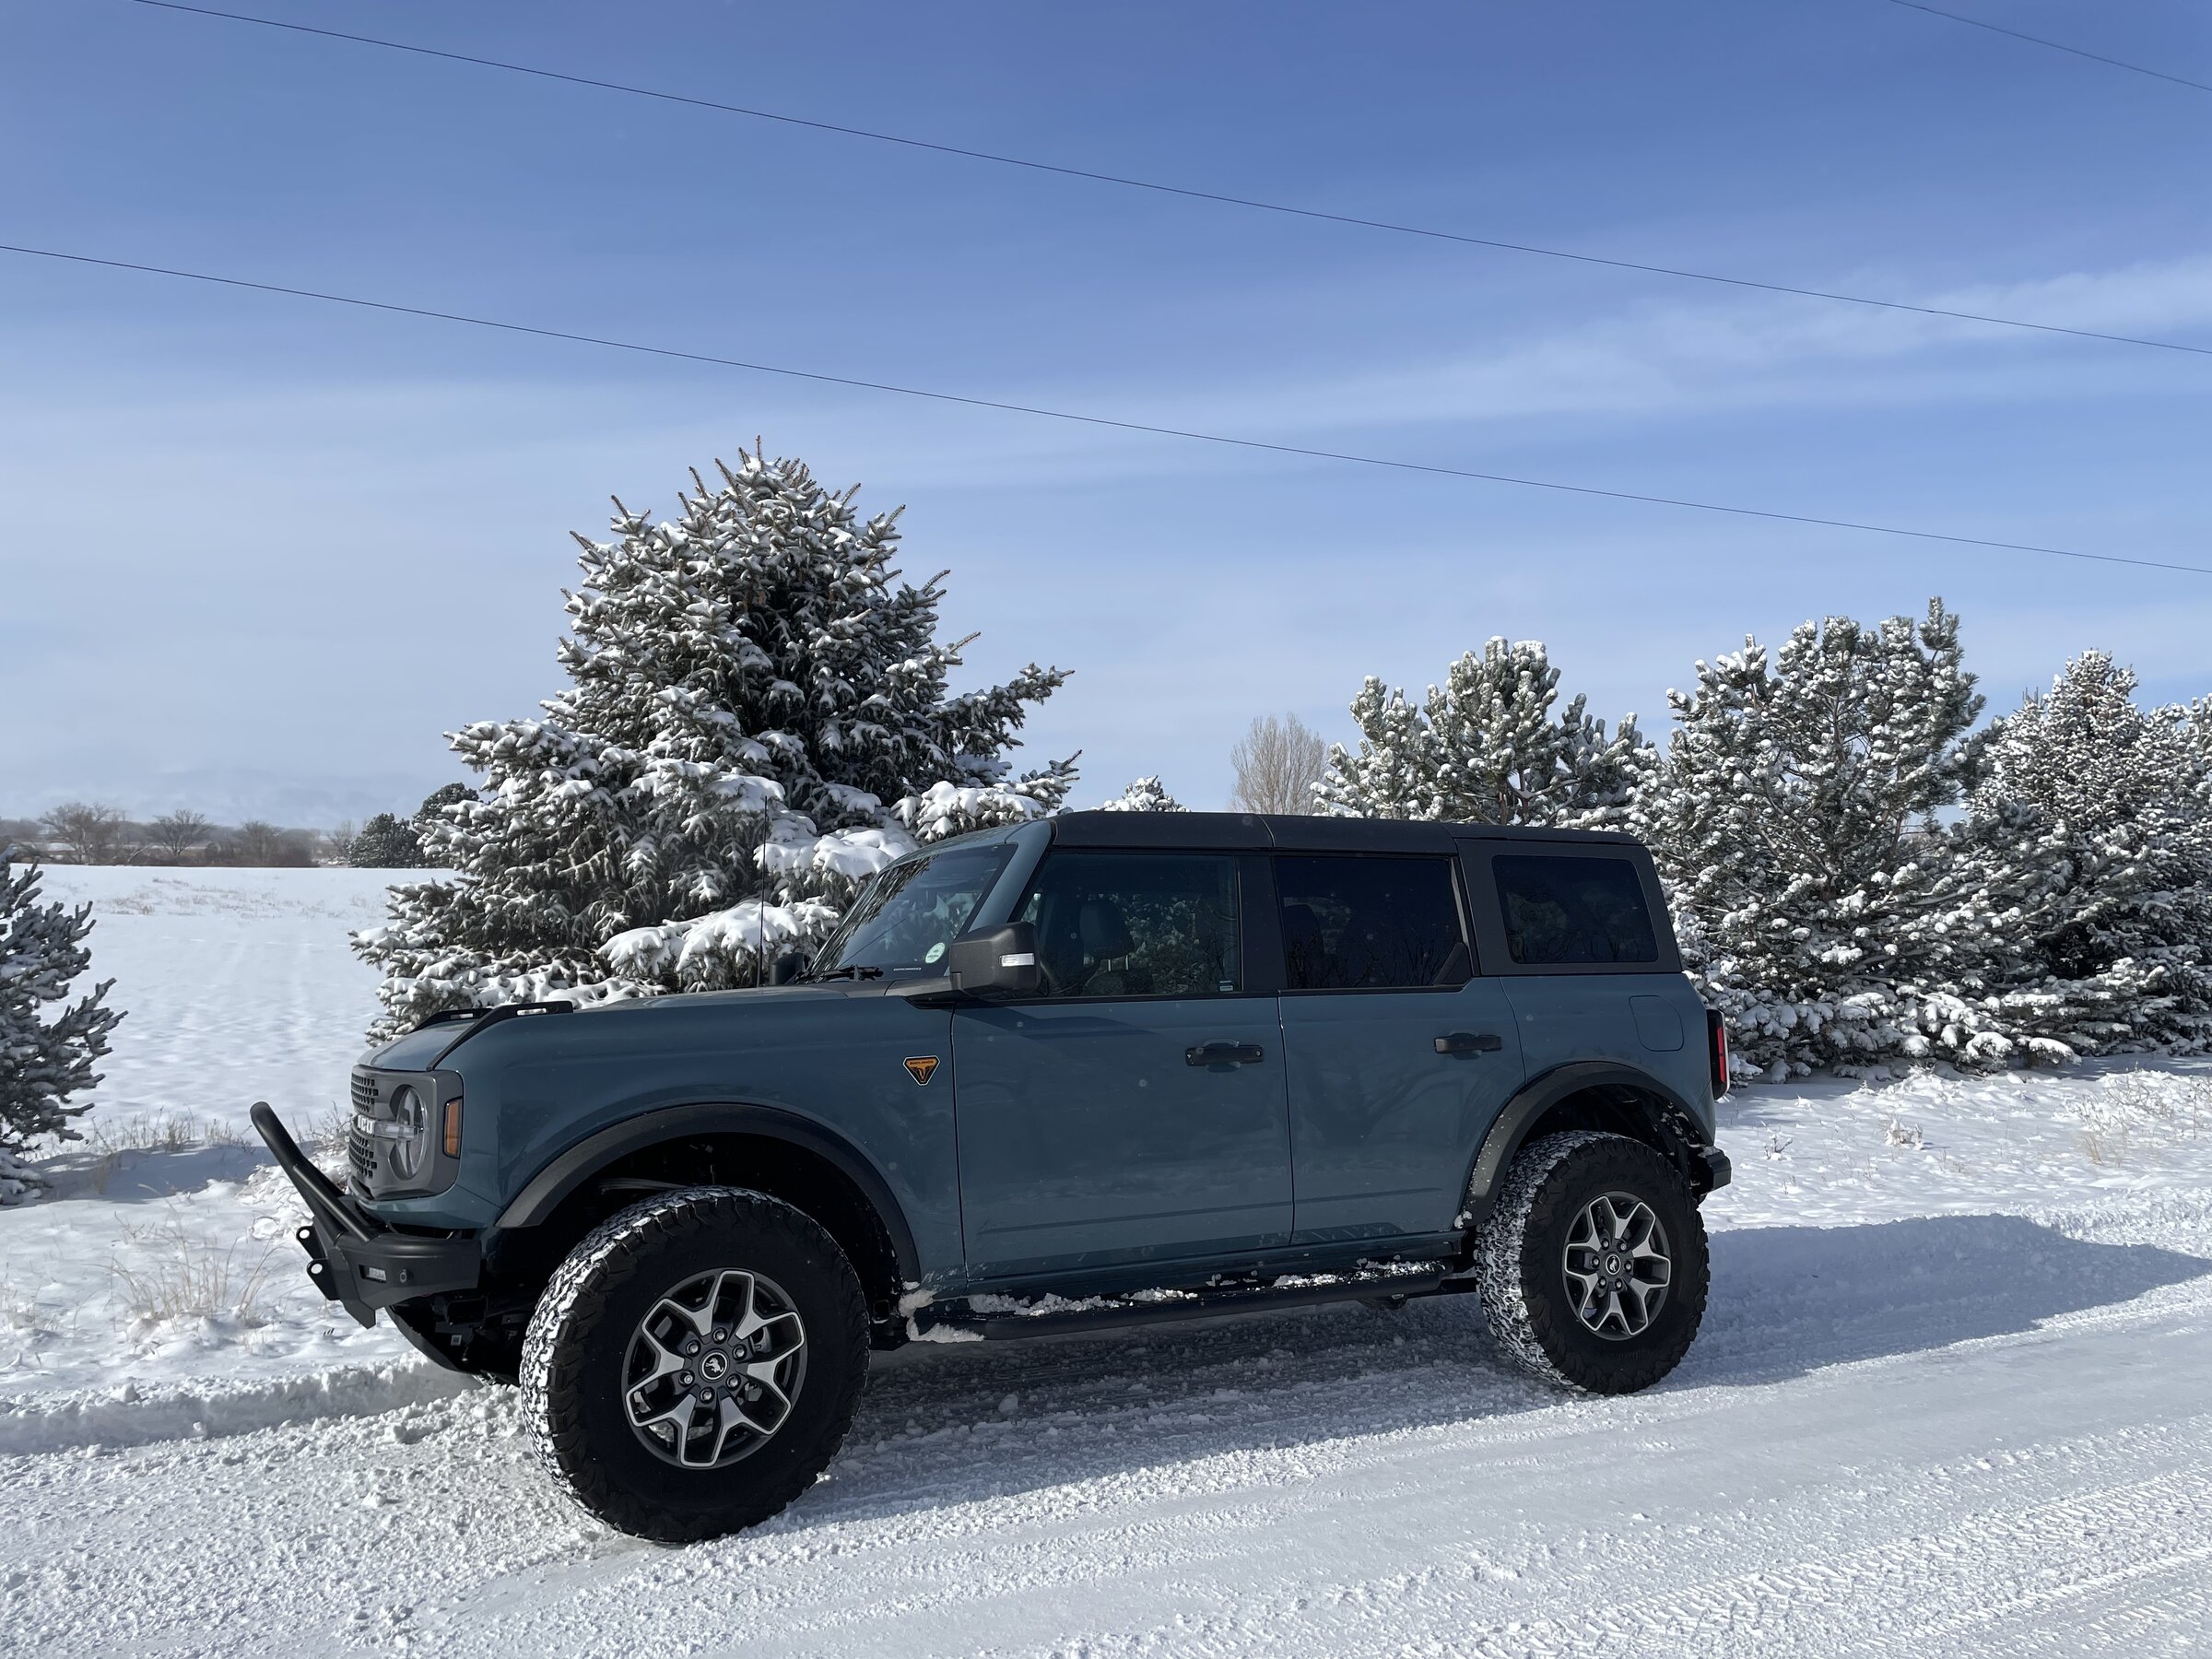 Ford Bronco Snow Pictures Please F5EFA6F8-F55C-4A08-8761-D5695D261923